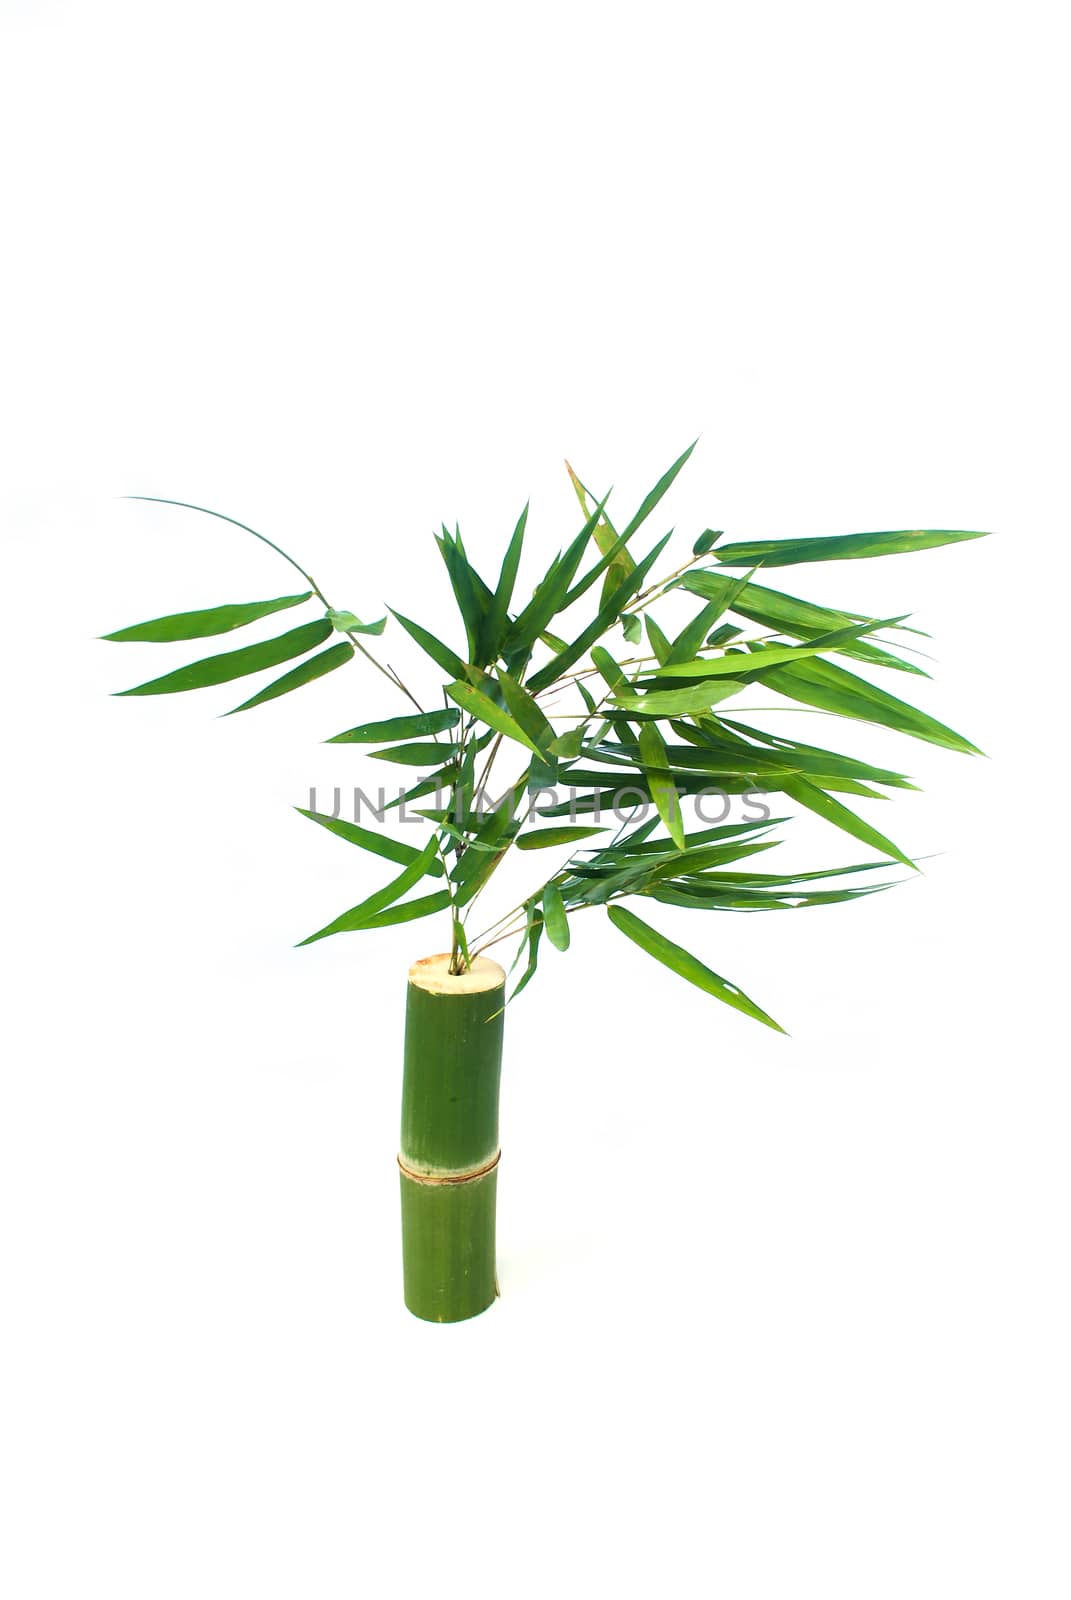 Bamboo and bamboo leaves On white background.